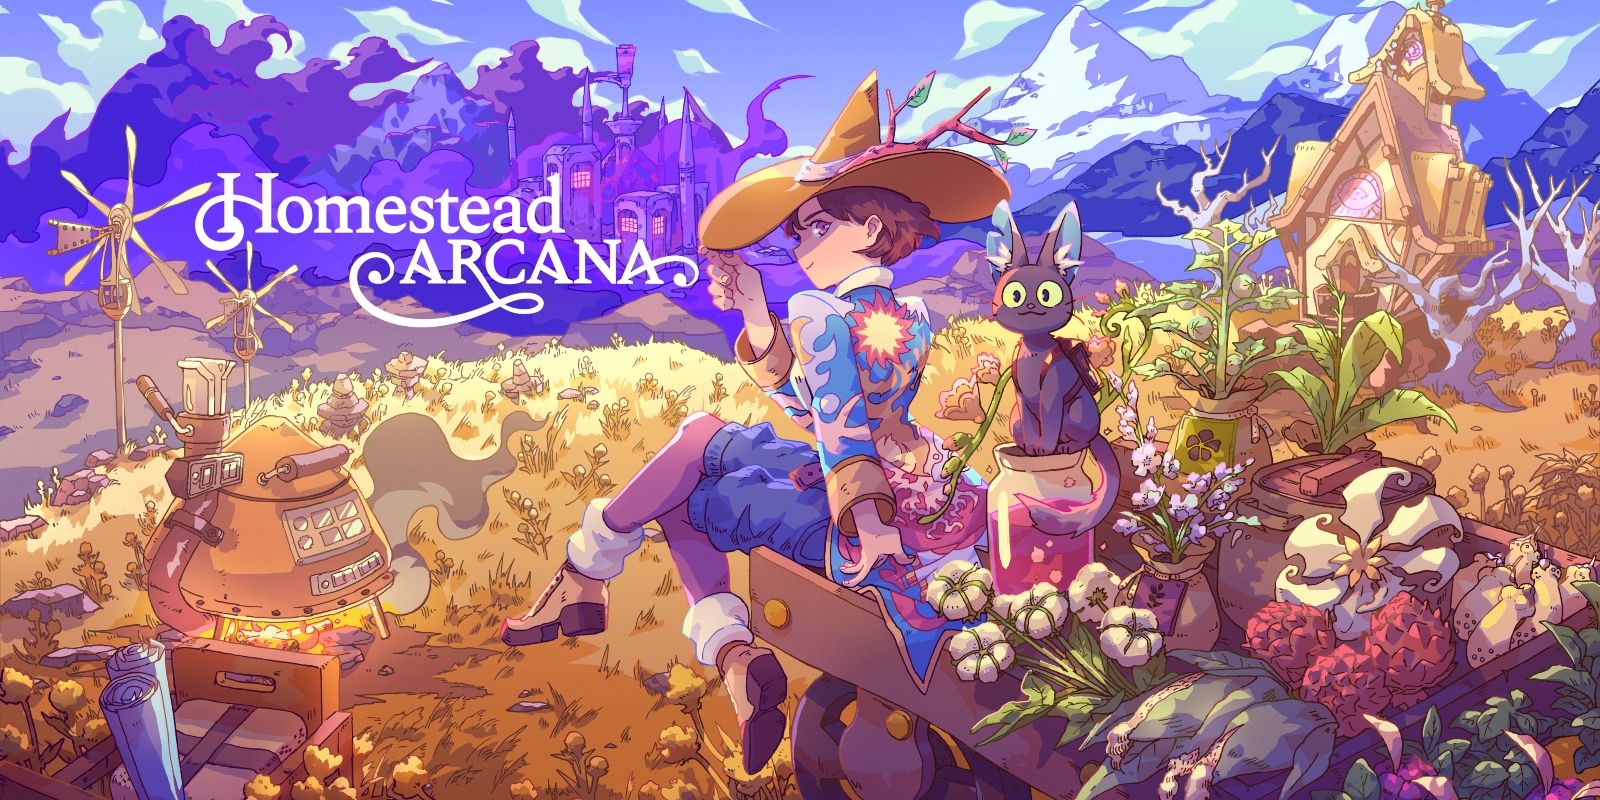 Homestead Arcana keyart showing a player with the cat Huckleberry sitting on a wagon with fields and Miasma in the background